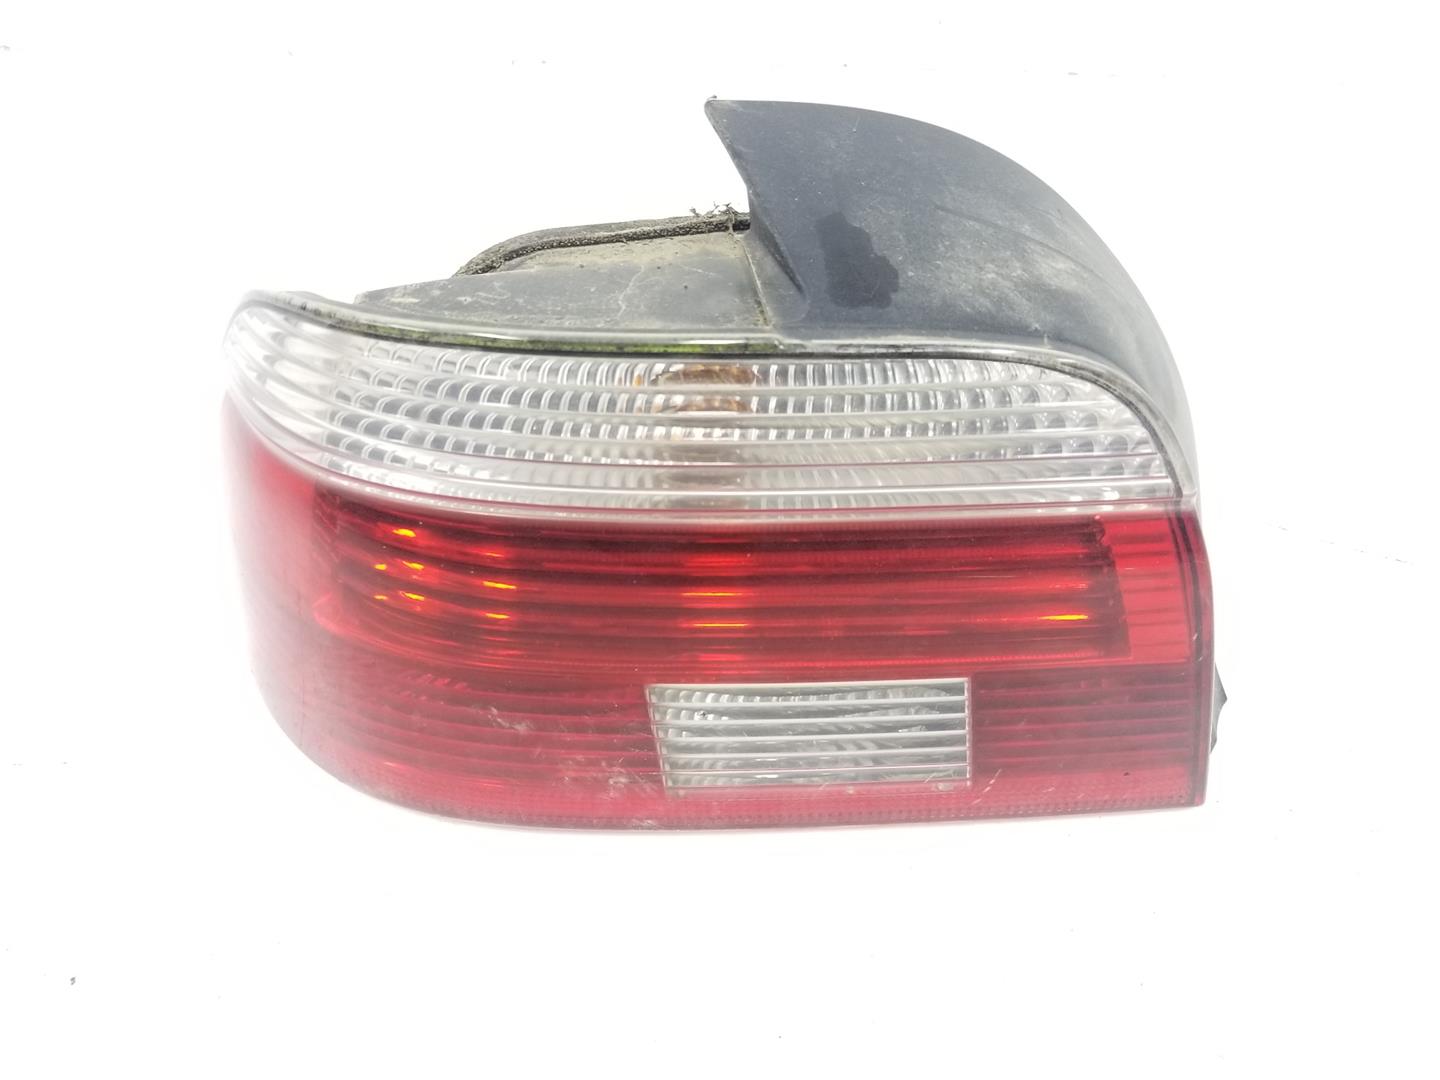 BMW 5 Series E39 (1995-2004) Rear Left Taillight 63216900209, 63216900209 19724161